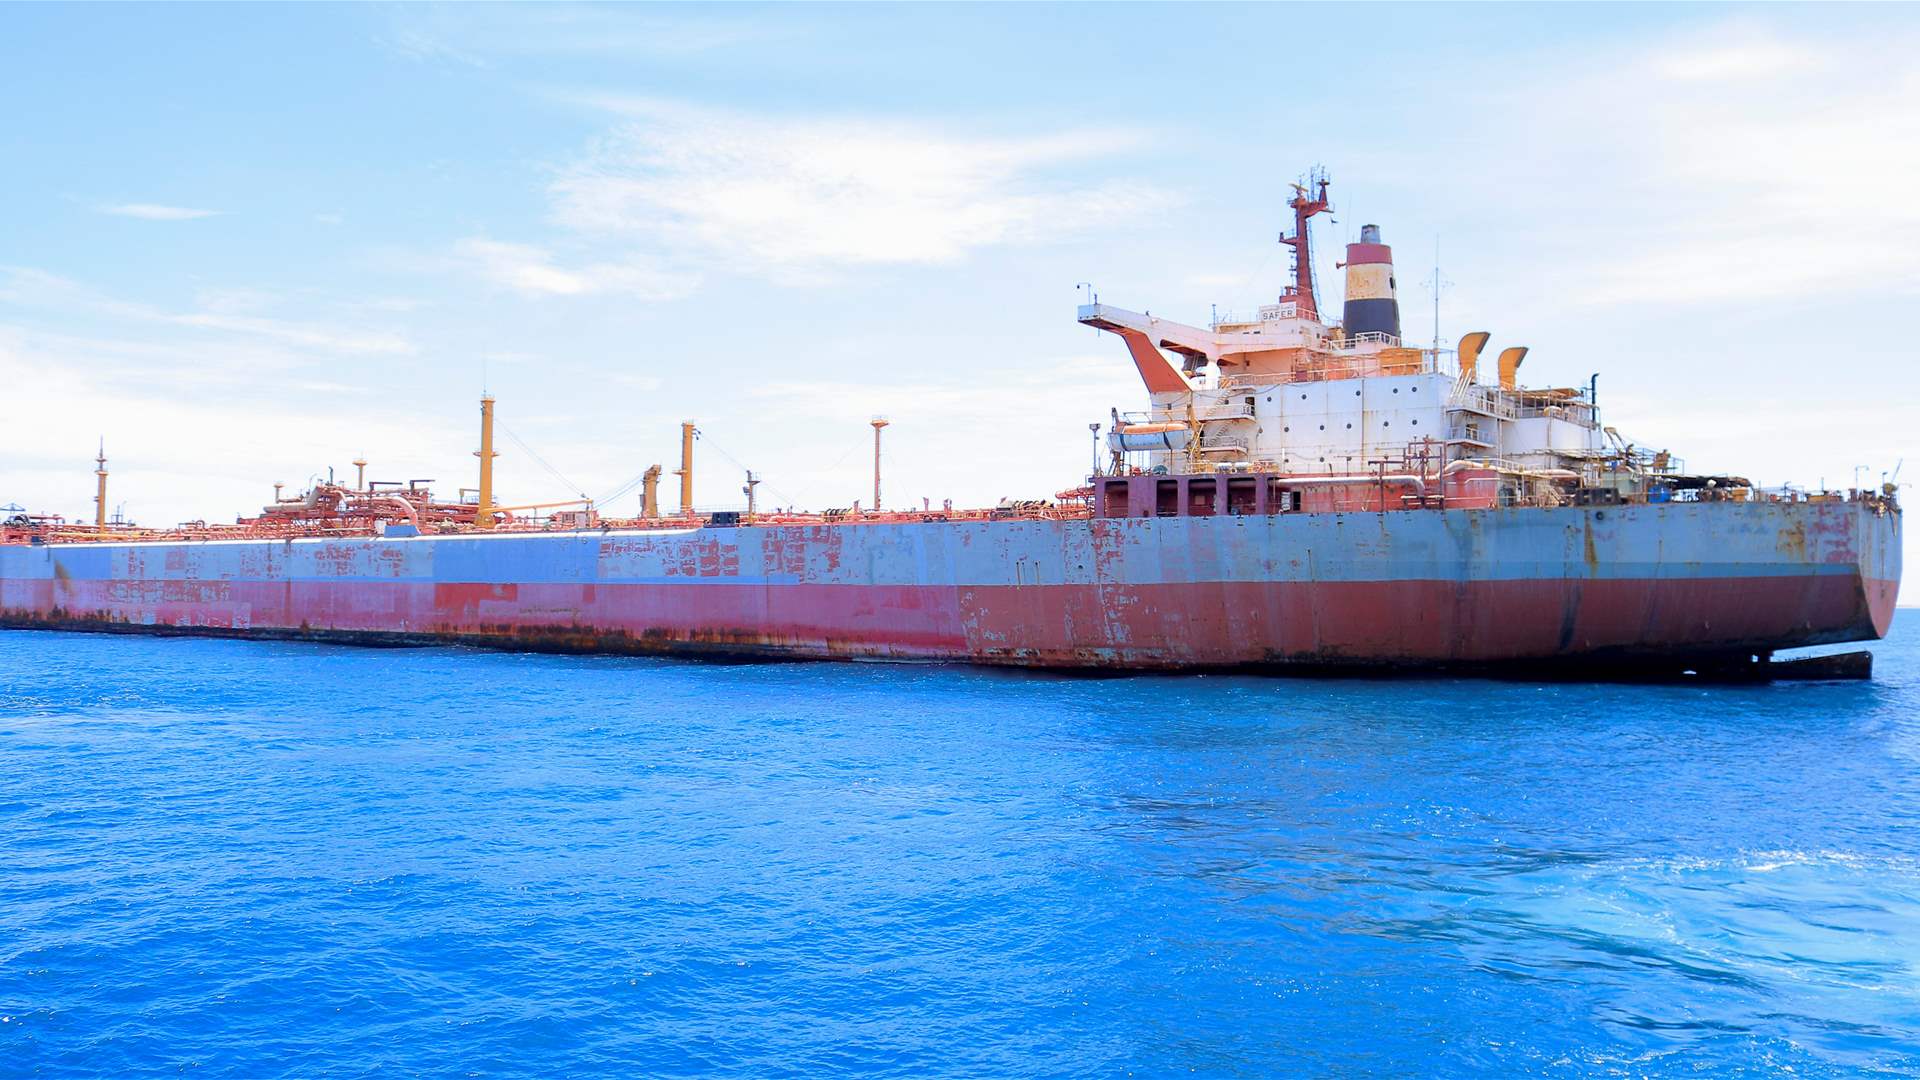 Initiative to withdraw oil from abandoned &quot;Safer&quot; tanker off Yemen